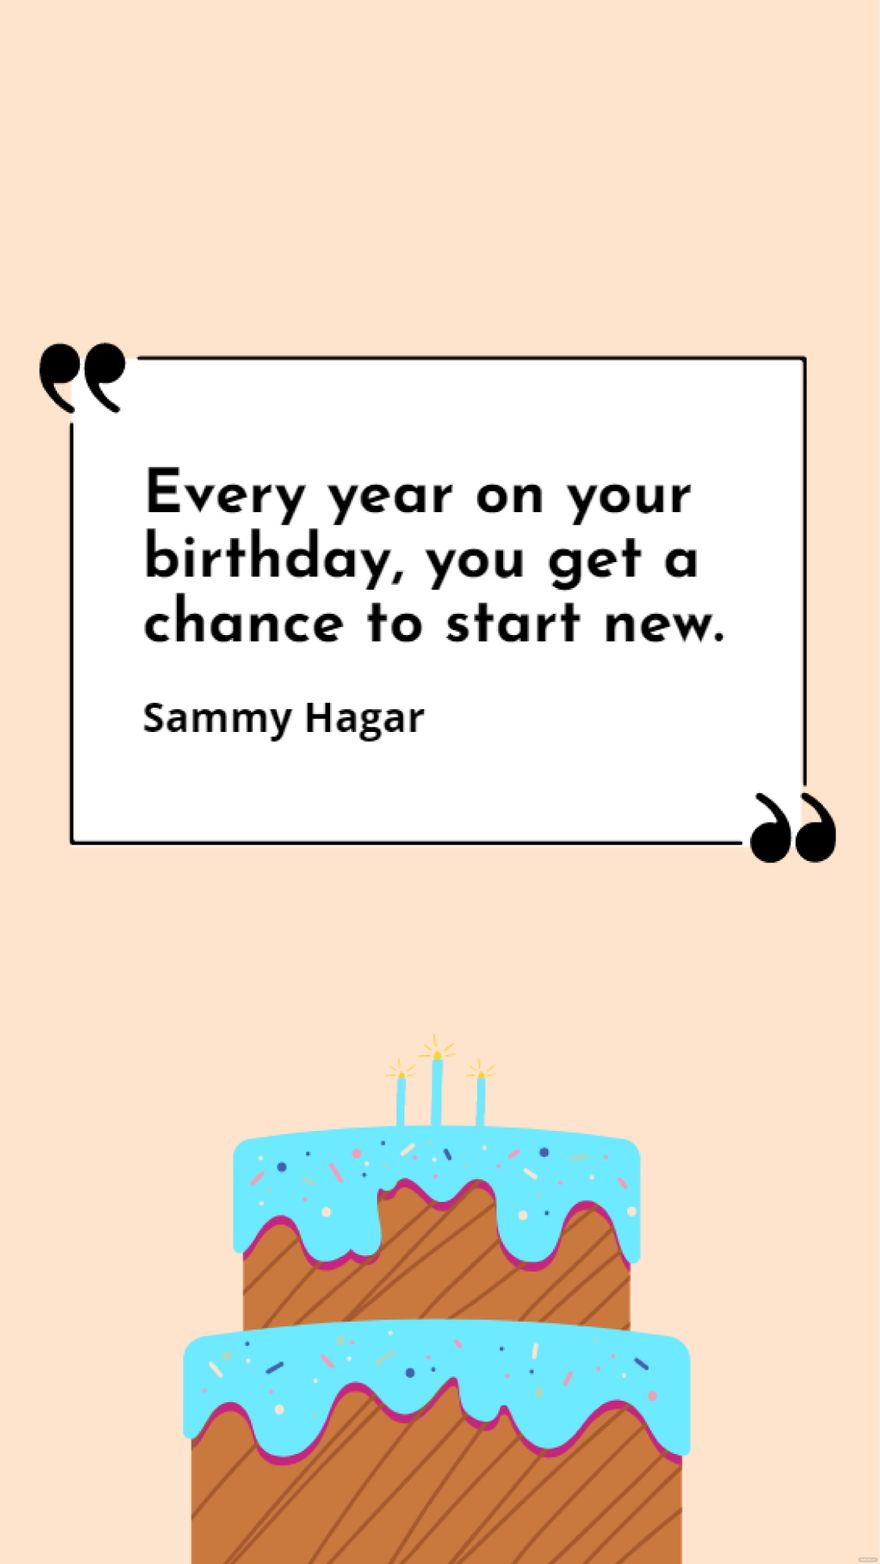 Free Sammy Hagar - Every year on your birthday, you get a chance to start new. in JPG